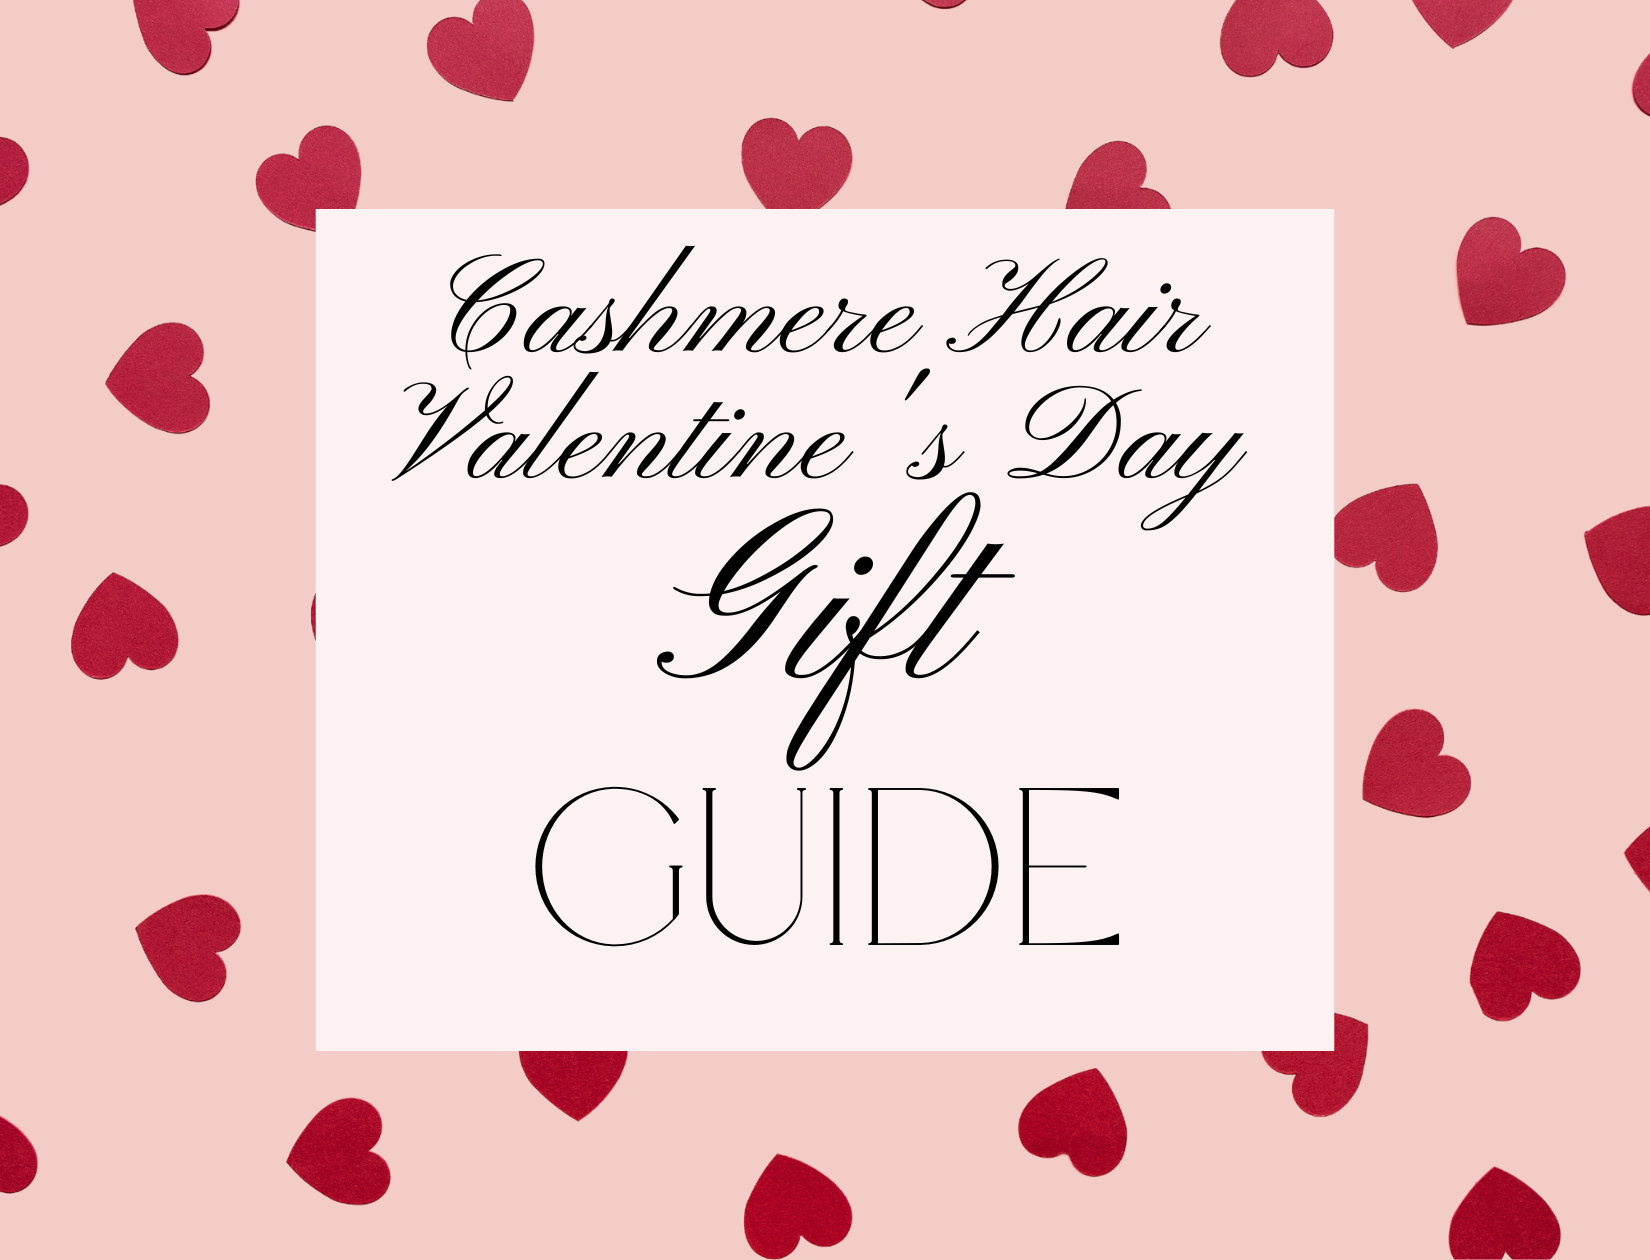 Cashmere hair 2023 Valentines Day Gift guide For Her title photo